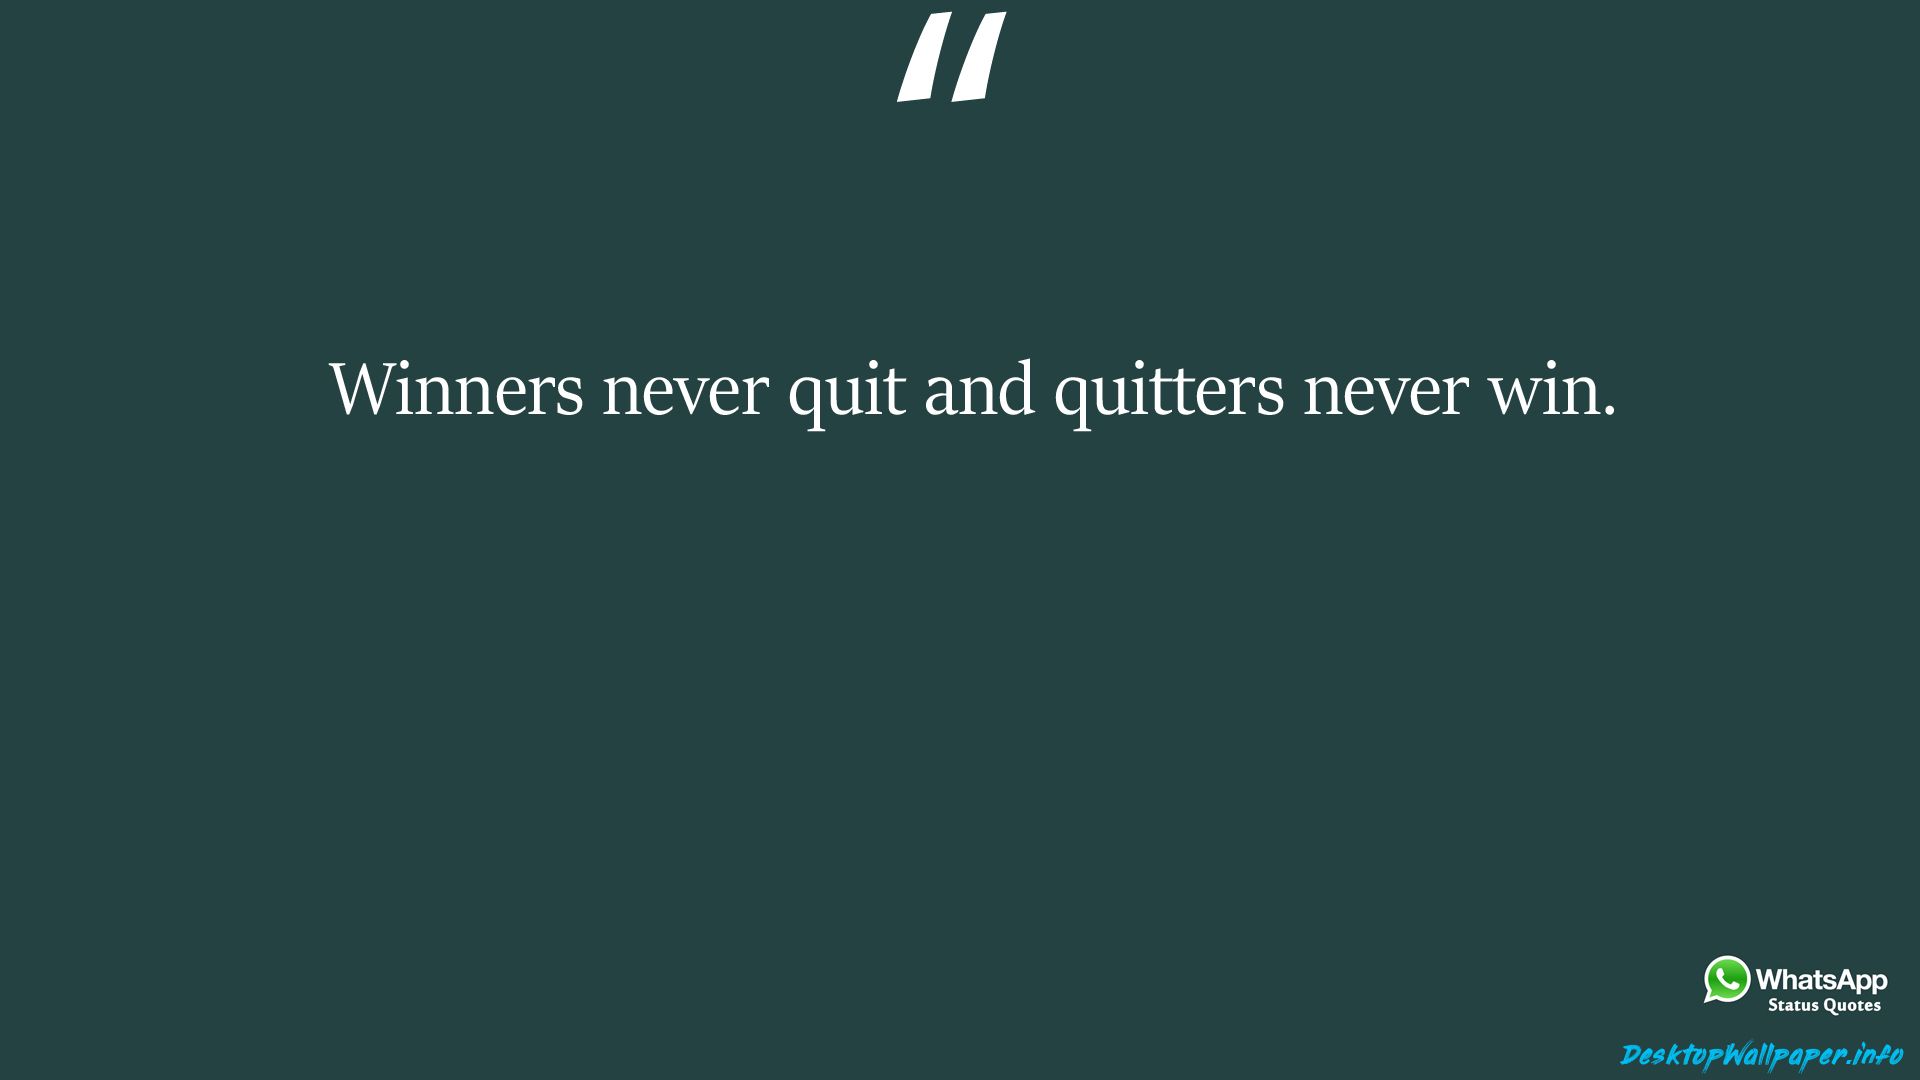 Winners never quit and quitters never win, HD Wallpaper Download